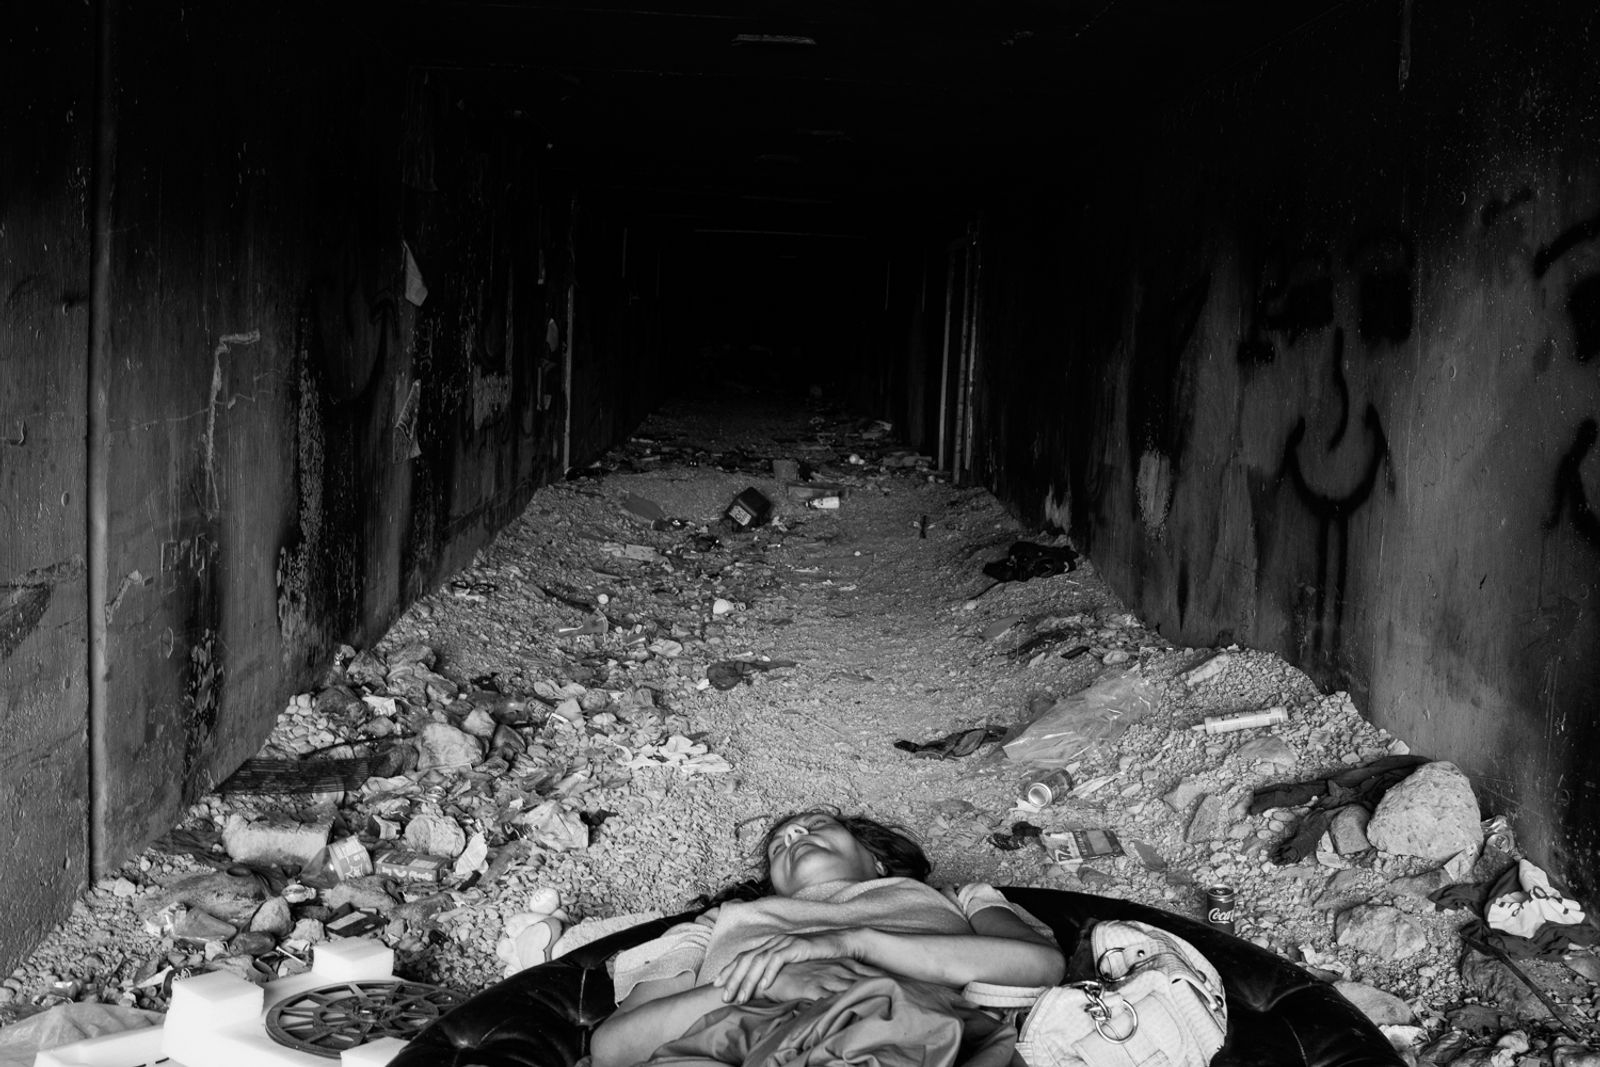 © Richard Sharum - A woman sleeps on an Ottoman at the entrance to one of the many tunnels leading under the Strip.